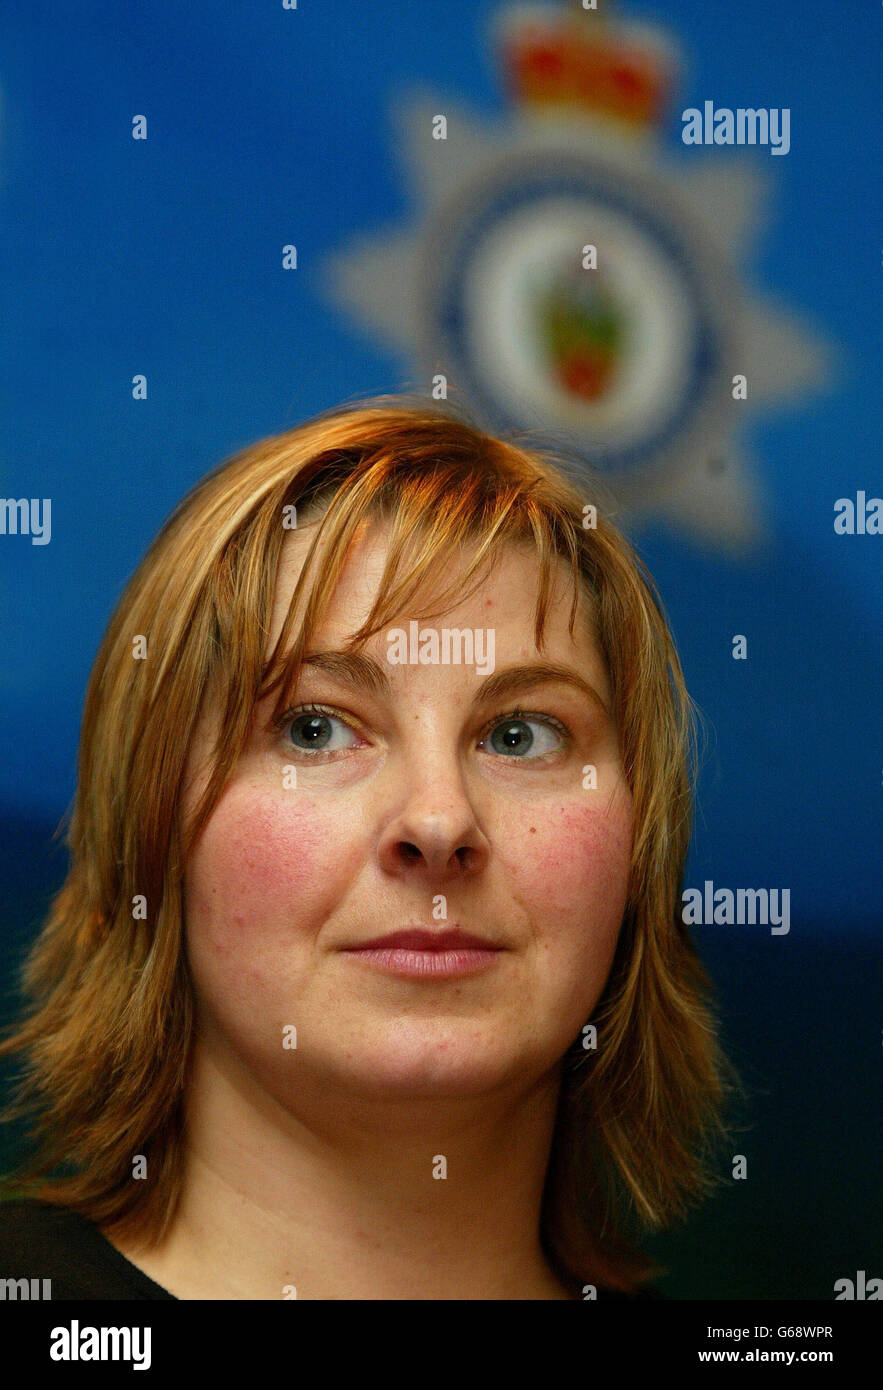 Karen Fallows, the wife of George Wilson Fallows, 57, speaks during a press conference in Caernafon after her husband admitted at Caernarfon Crown Court, to trying to hire a hitman to kill her in a deliberate car crash. * George Wilson Fallows, of Llangernyw, North Wales, offered cash to another man to smash a lorry into his wife Karen Fallows as she drove along a deserted country lane but was caught because the hitman was in fact an undercover police officer. Fallows pleaded guilty at Caernarfon Crown Court to soliciting the murder of his 37-year-old wife and will be sentenced on April 23. Stock Photo